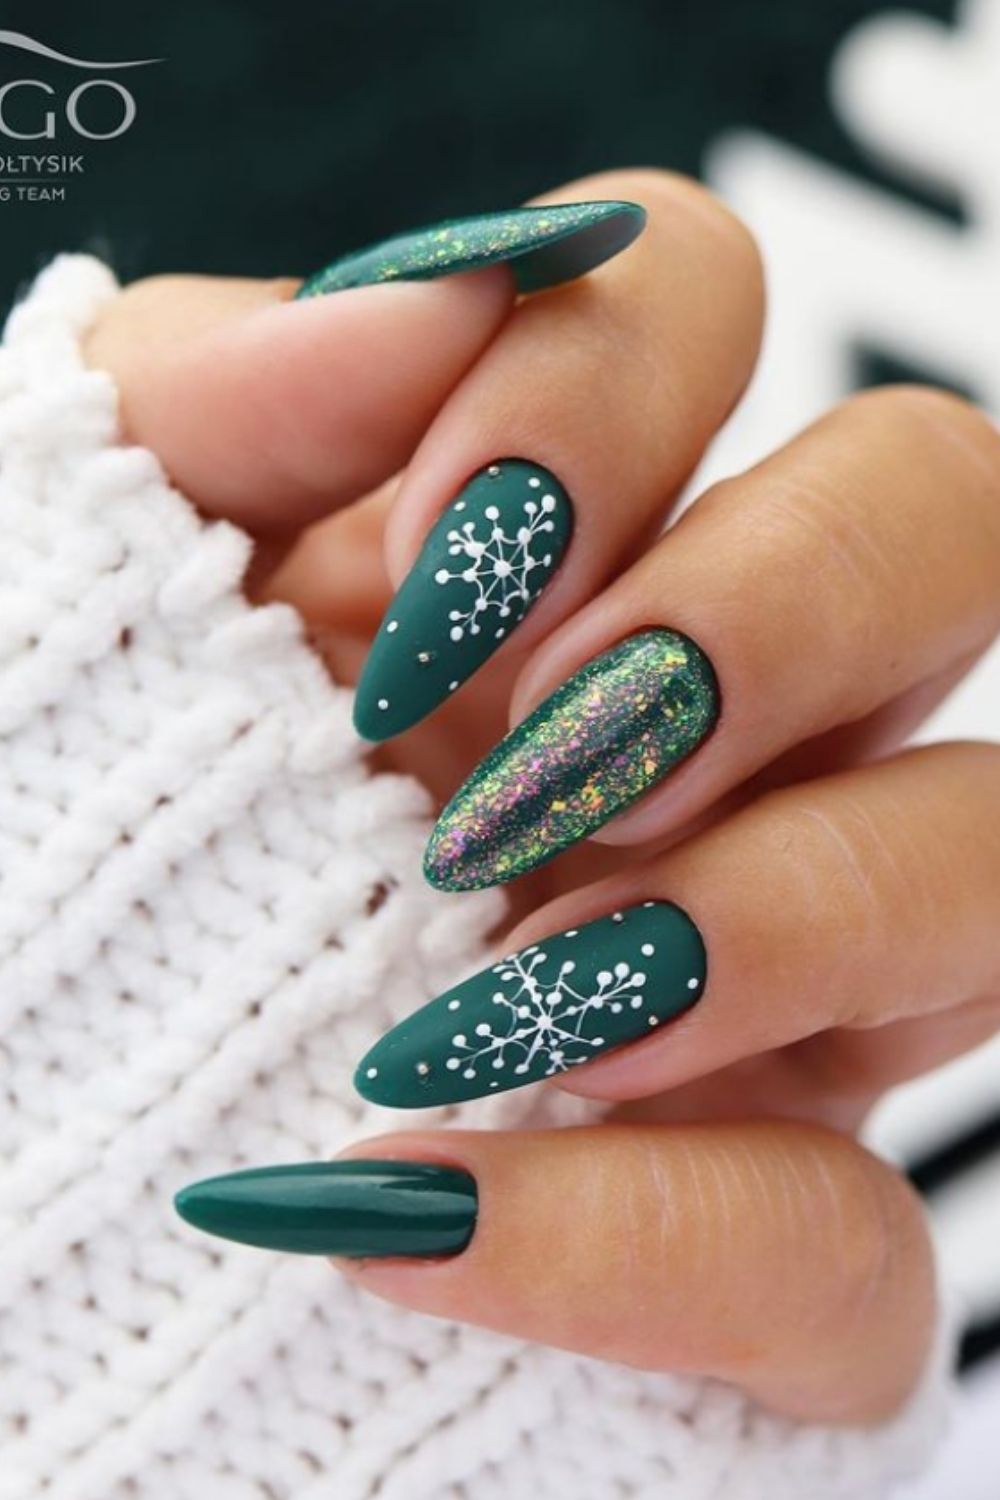 Green and glitter green almond nails ideas